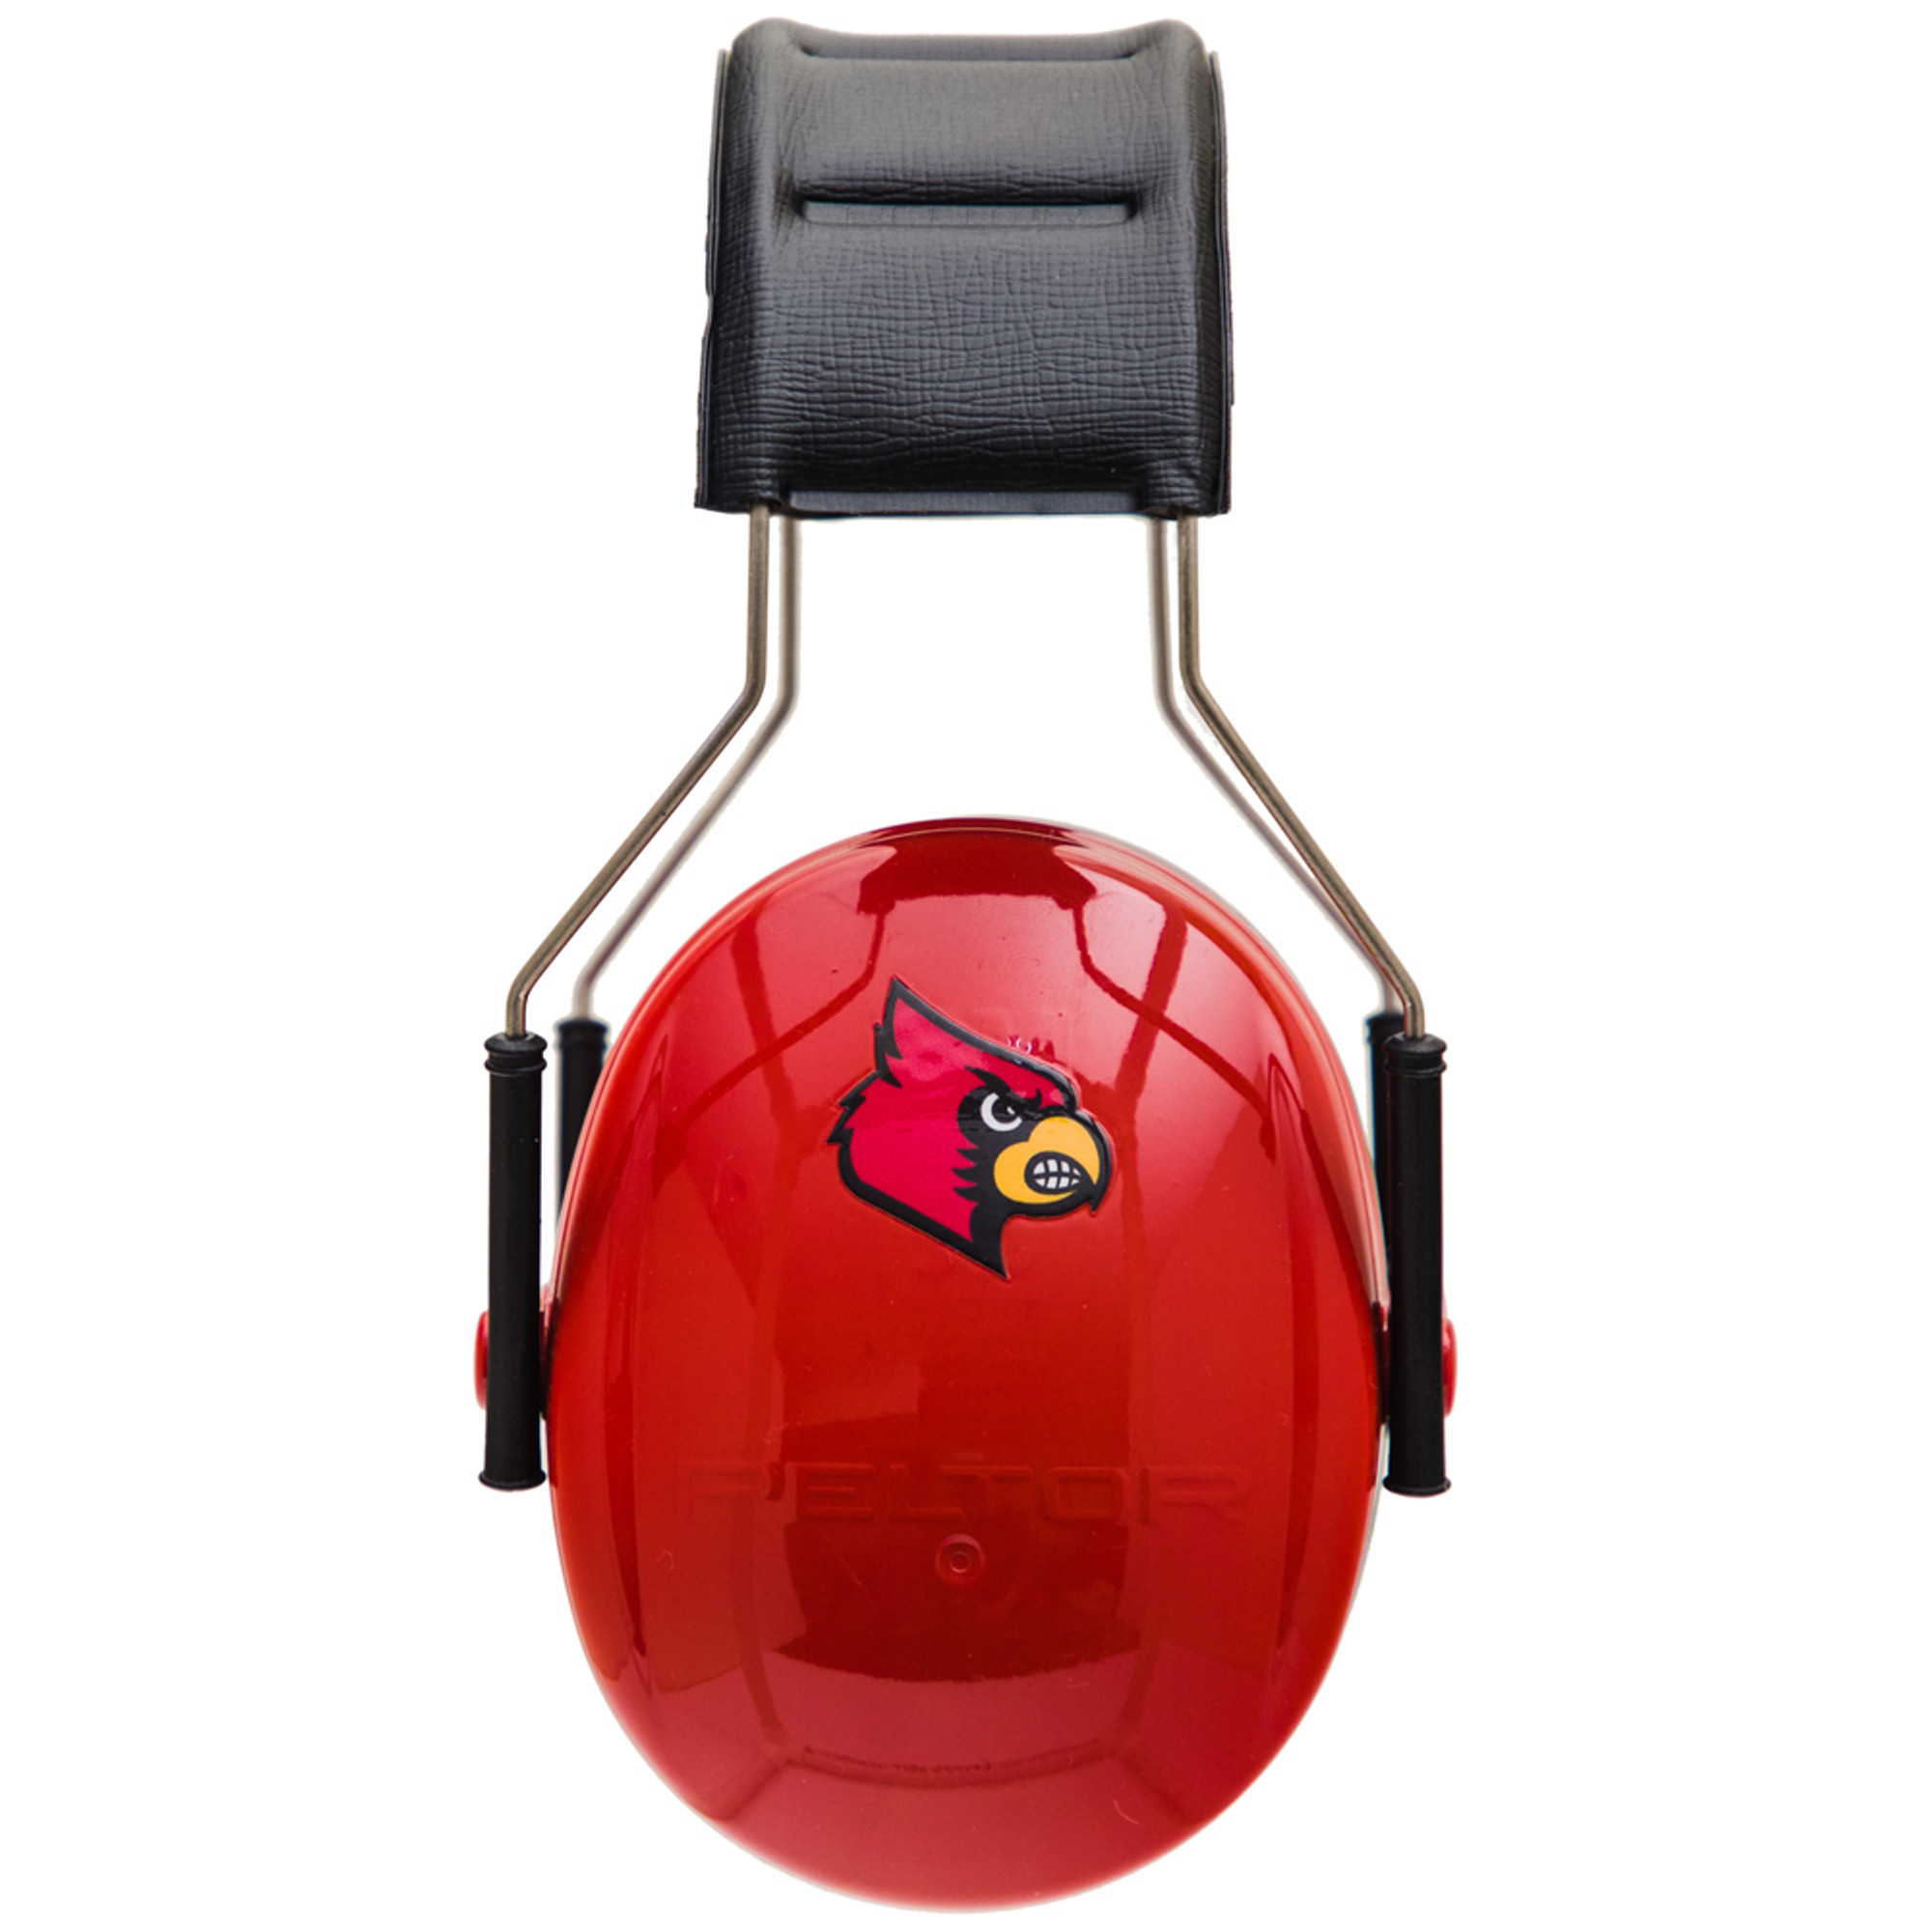 University of Louisville Cardinals Silicone Airpod Case: University of  Louisville